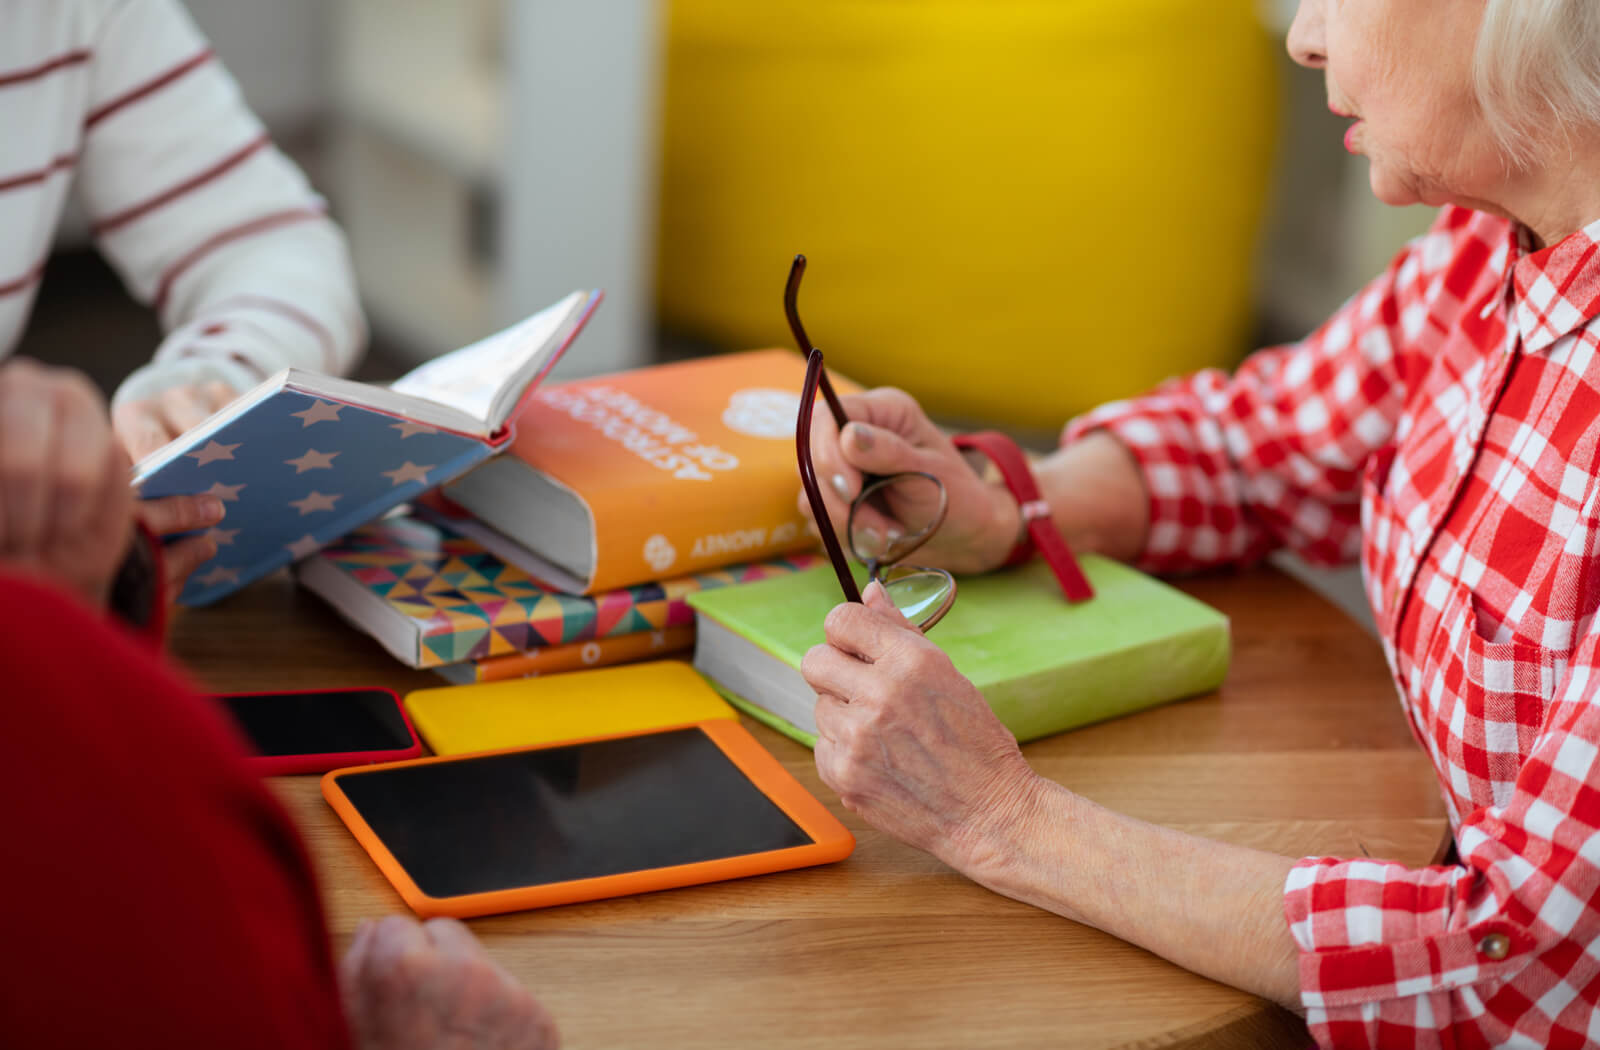 Photo of 3 seniors sitting around a table, with books and tablets in the middle. one senior is holding a pair of glasses and speaking.